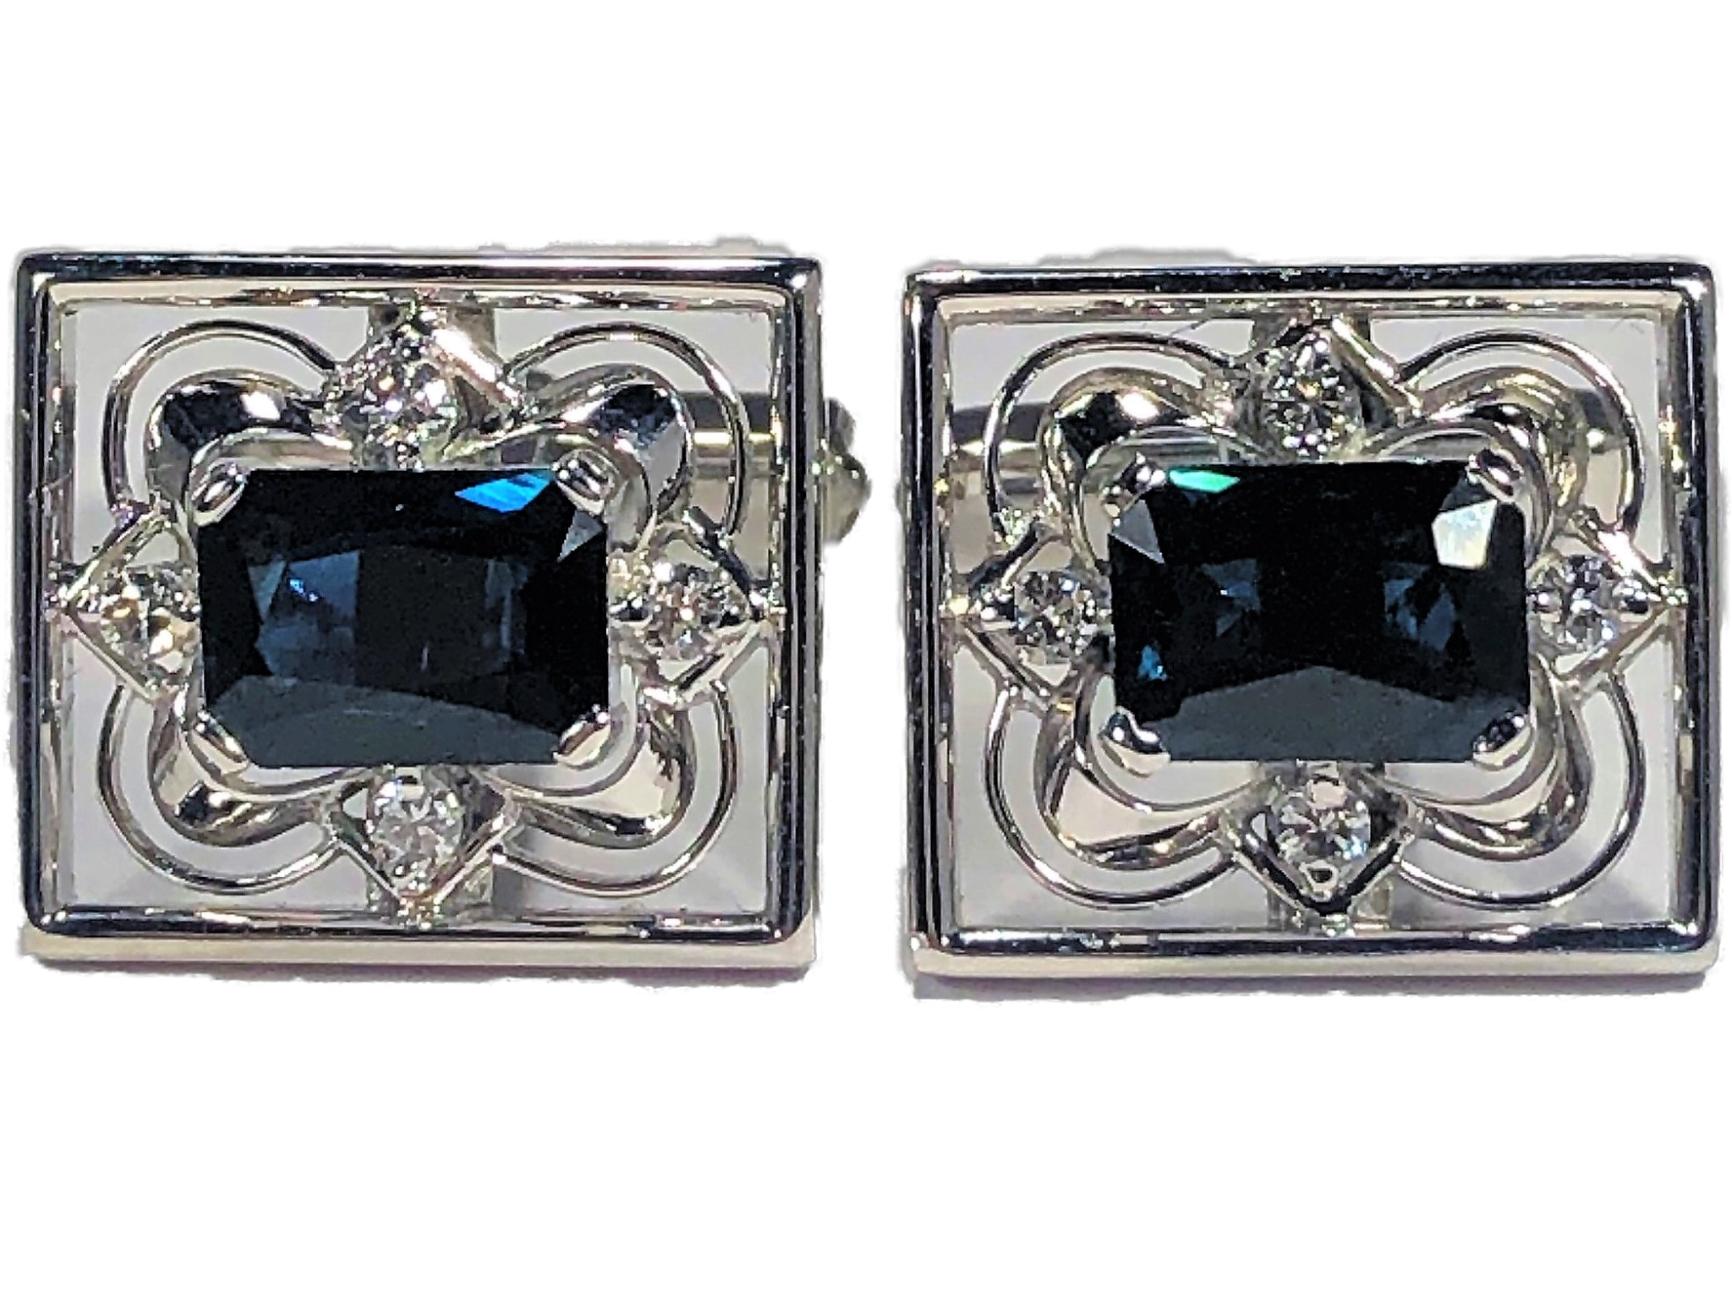 A pair of platinum cufflinks centered around an emerald cut sapphire, with round brilliant cut diamonds at the north, south, east, and west of the sapphire. Borrowing inspiration from both the Edwardian and Art Deco periods, they feature a geometric